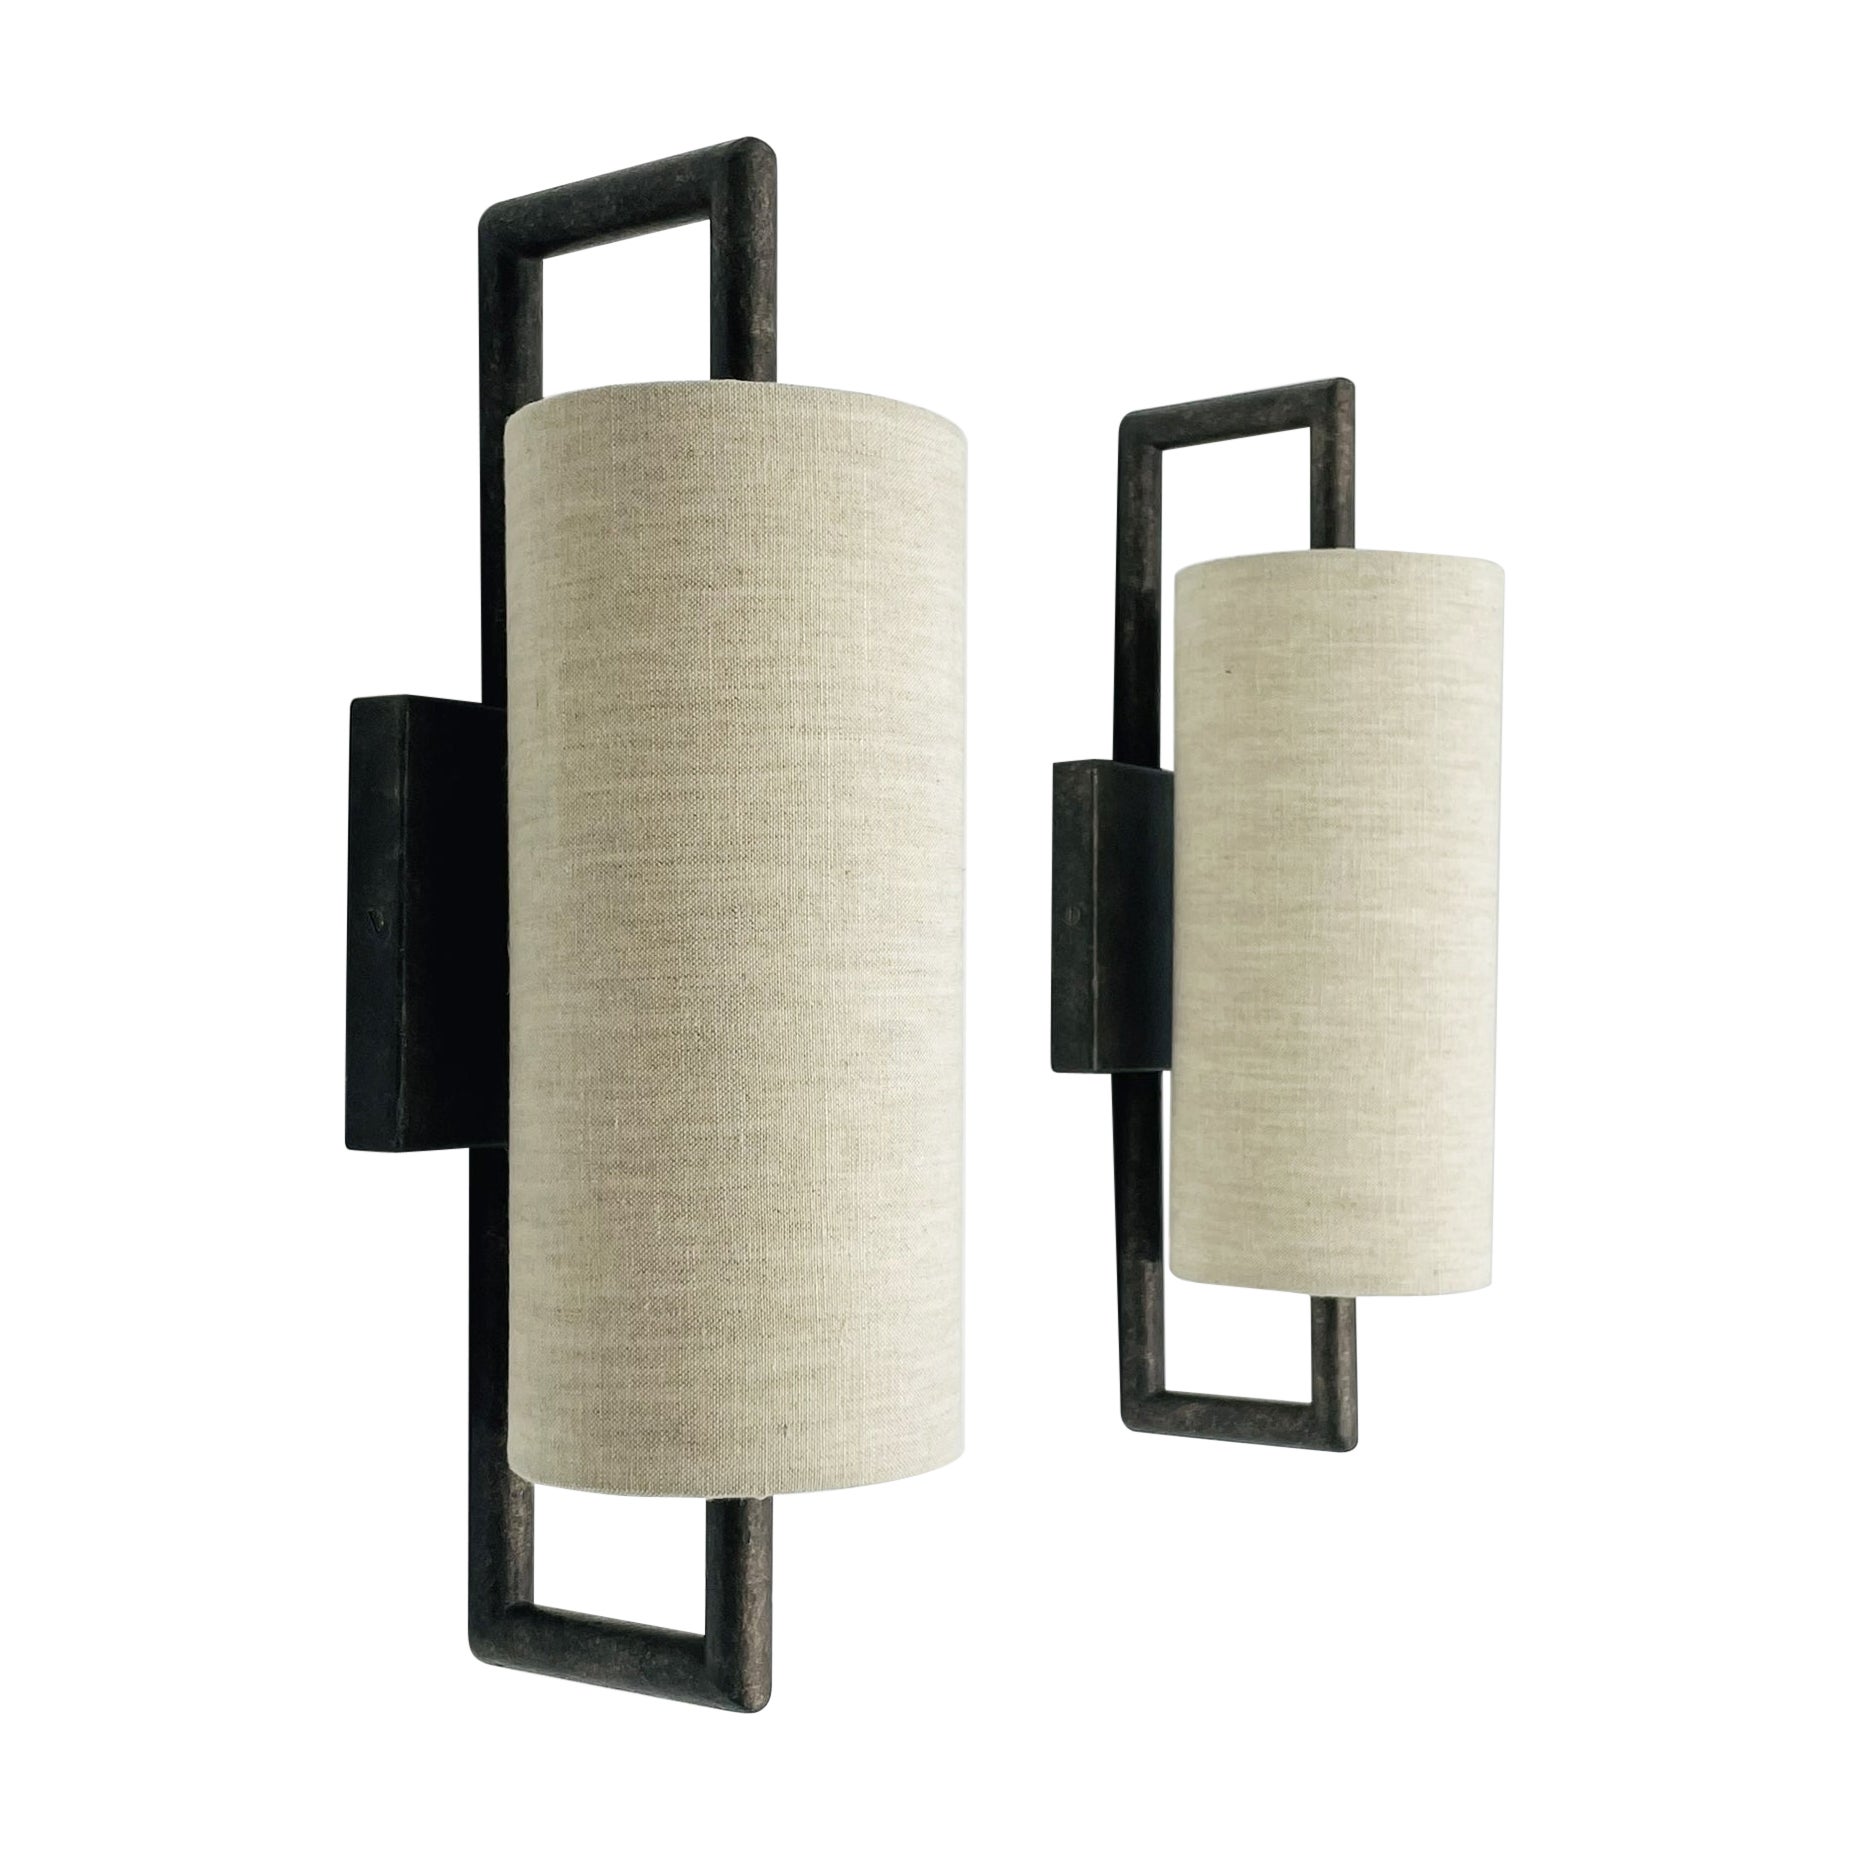 Pair of Lille Wall Lights/Sconces by Porta Romana